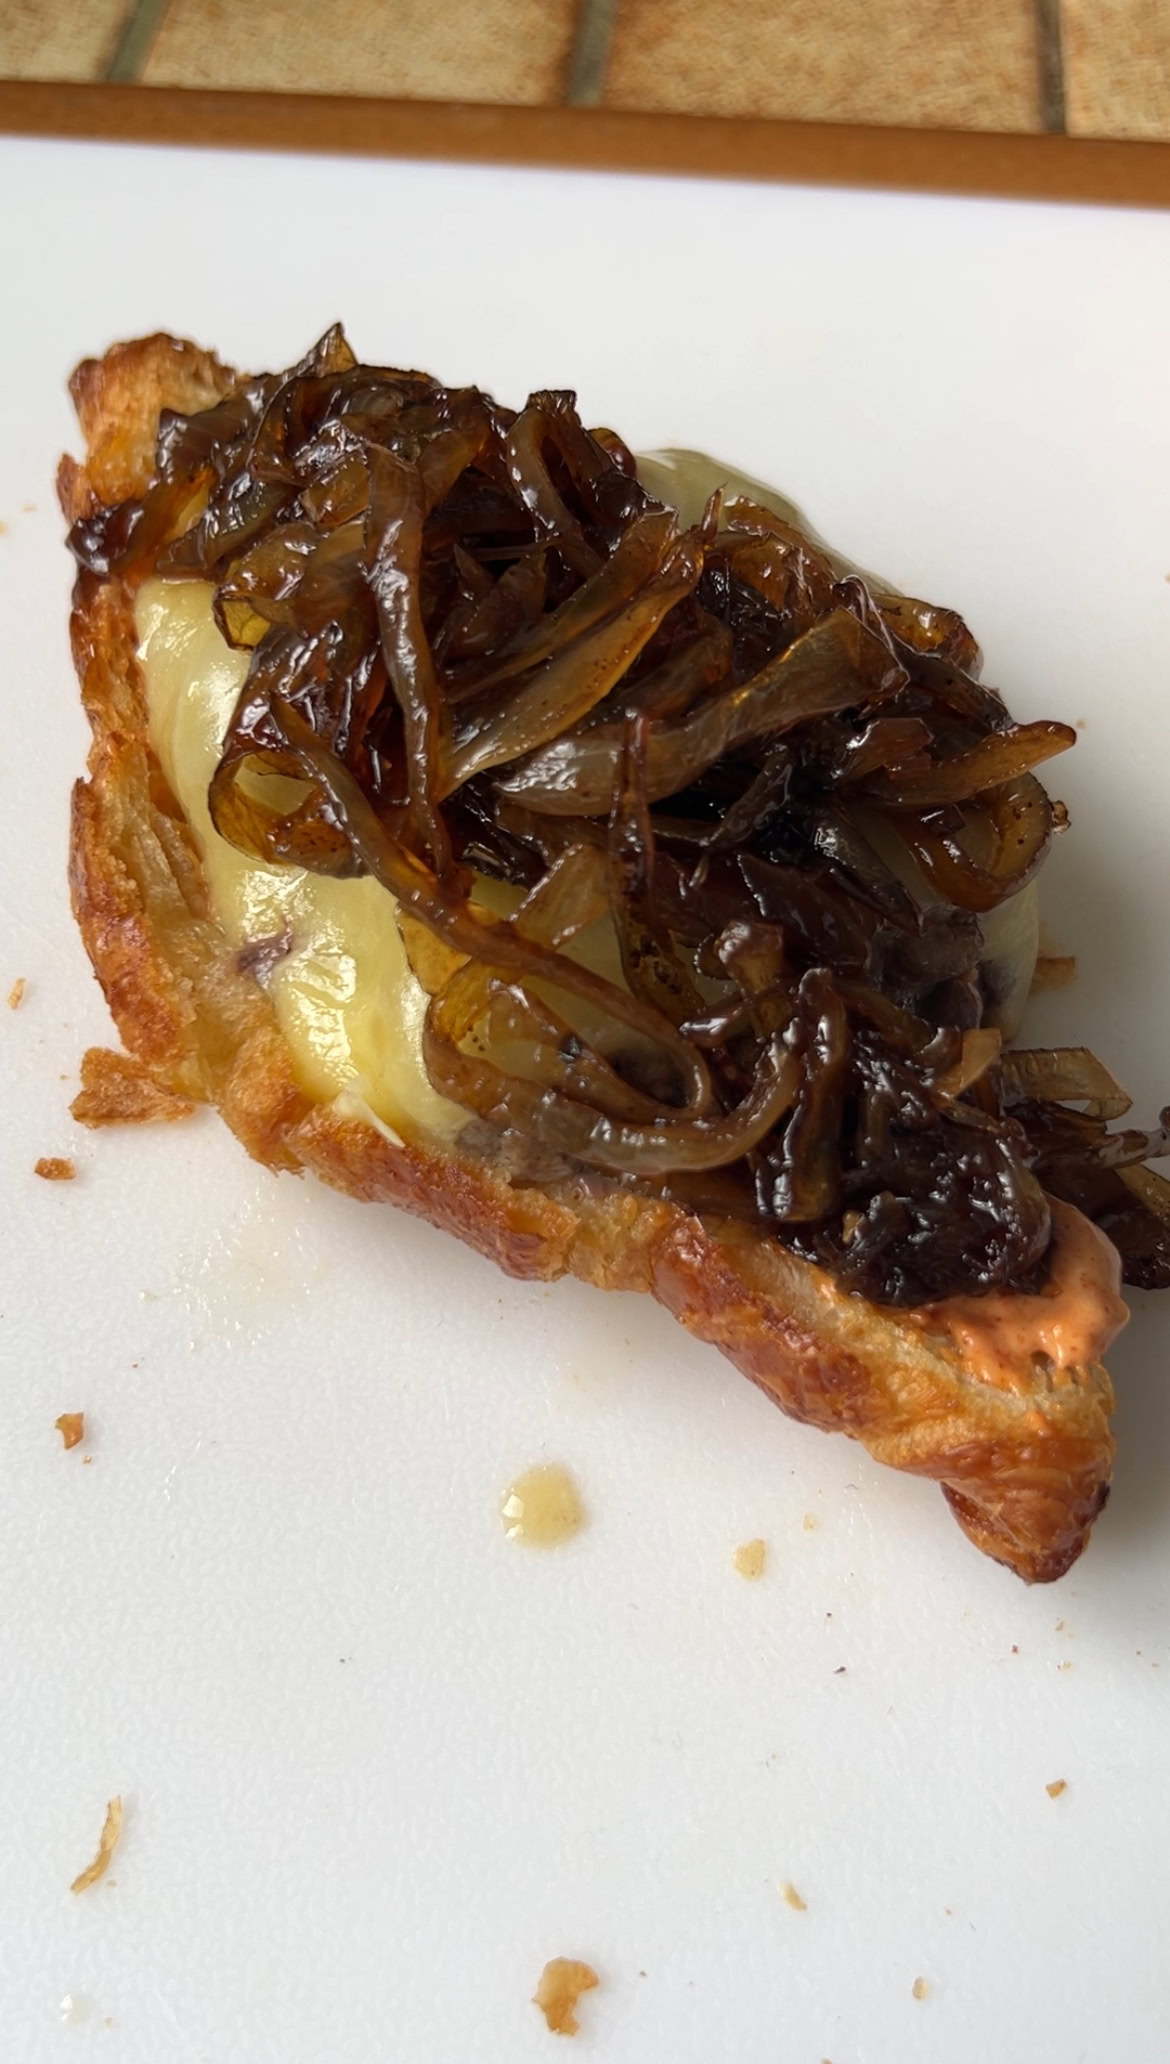 Onion confit added to the meat and melted cheese, on the half croissant.